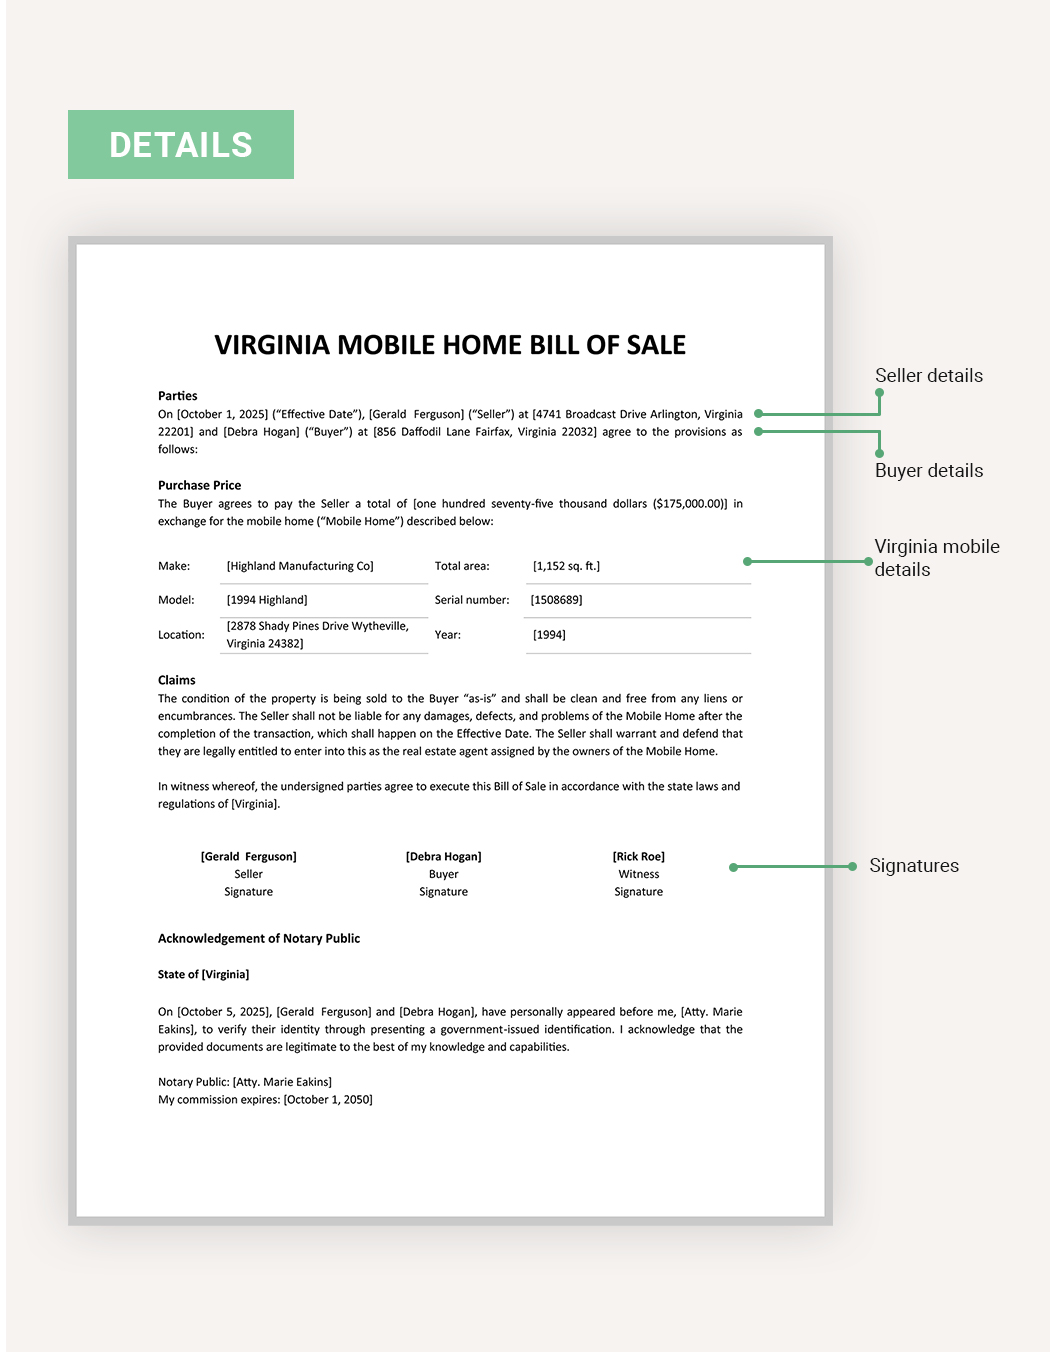 Virginia Mobile Home Bill Of Sale Template